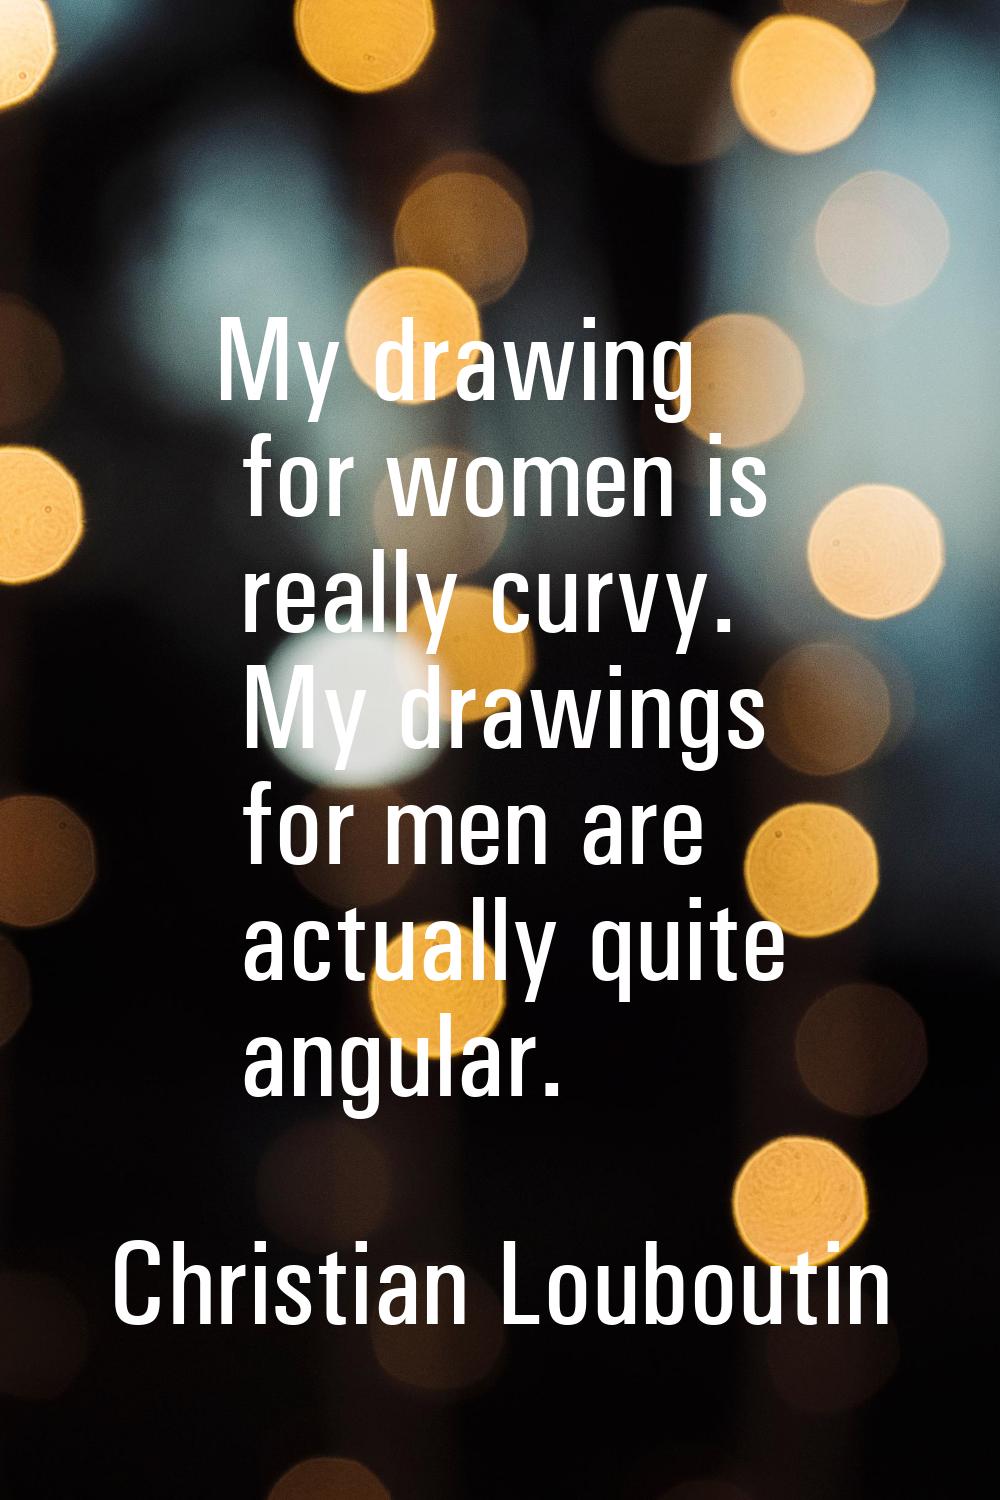 My drawing for women is really curvy. My drawings for men are actually quite angular.